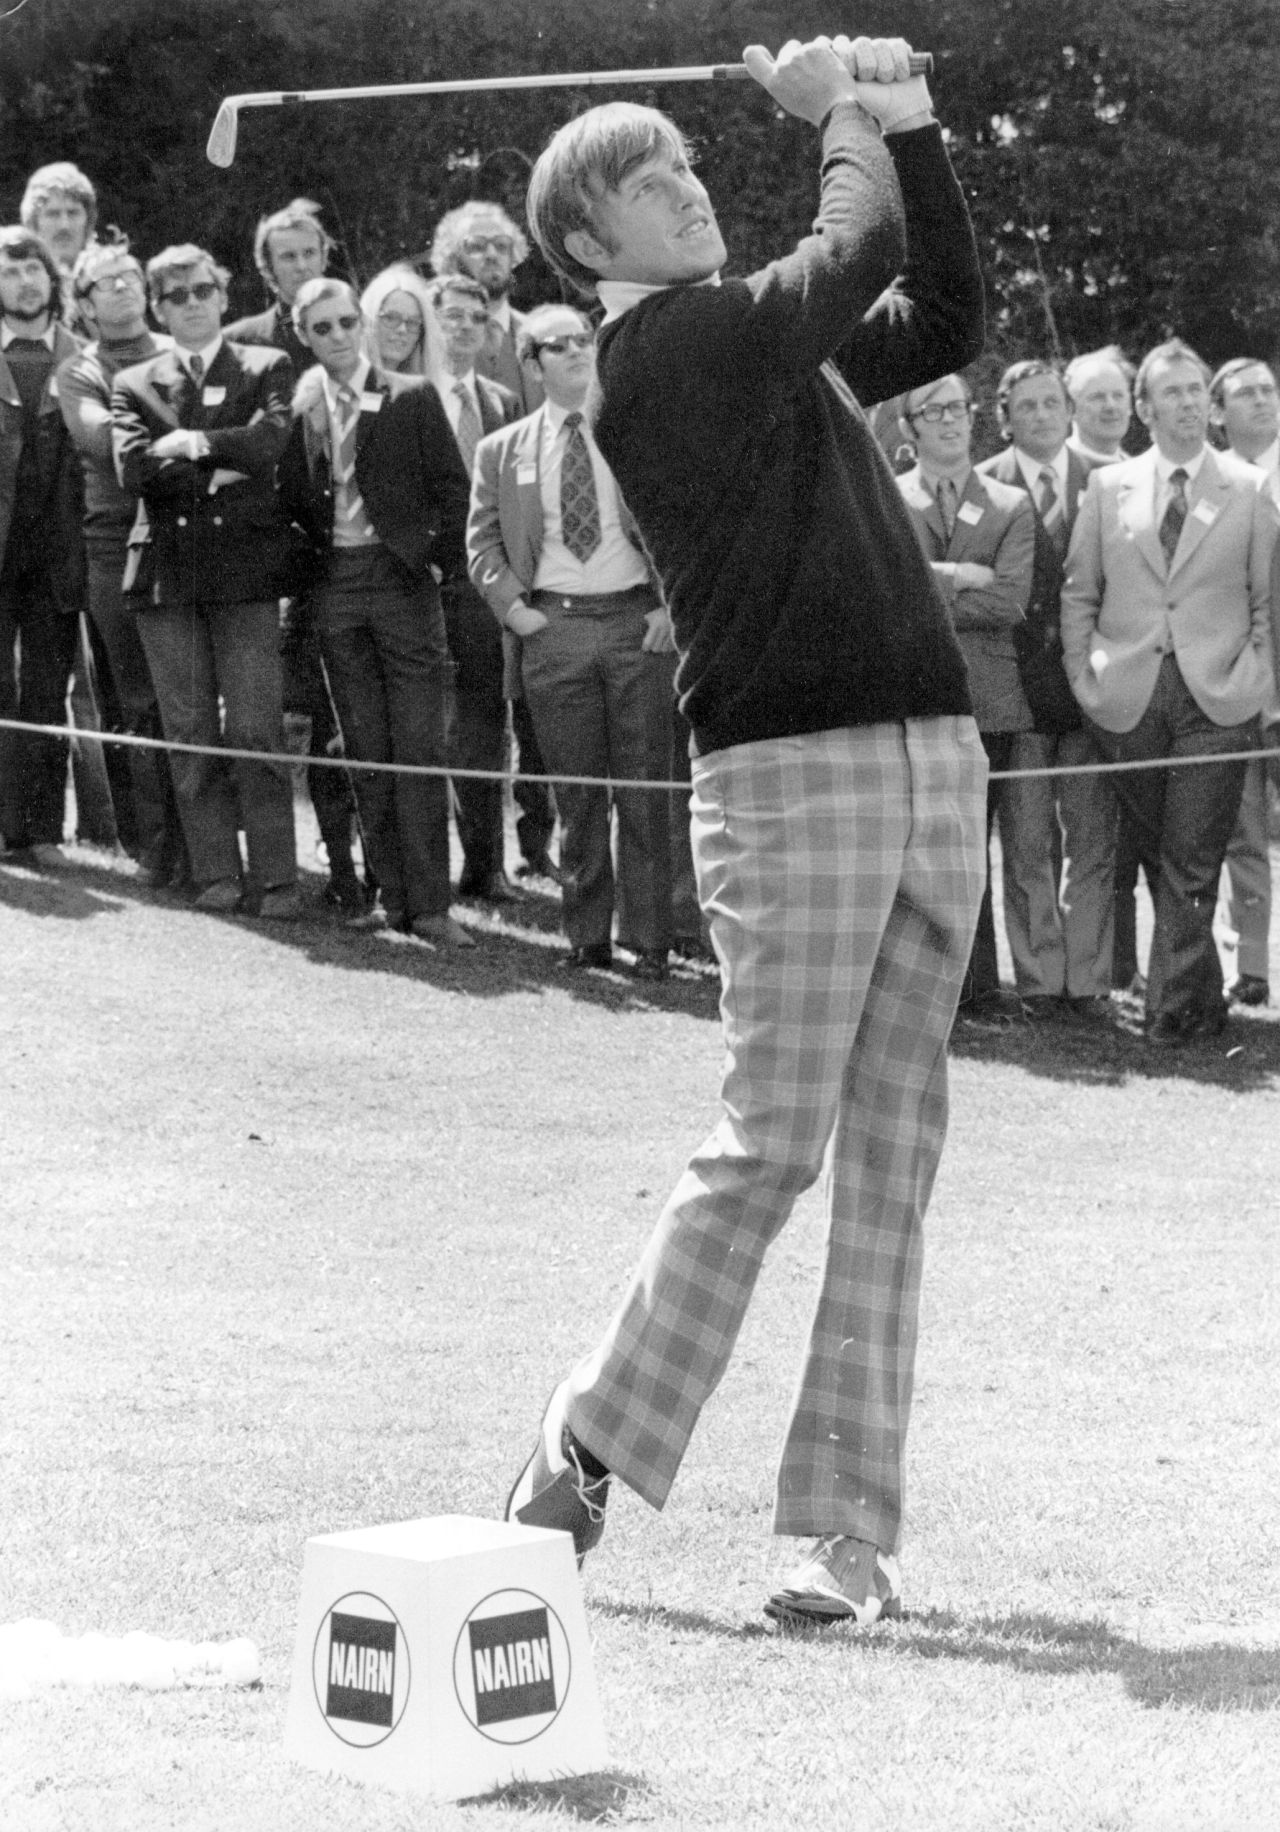 English golfer Peter Oosterhuis dominated the European Tour's early years, winning the points list from its birth until 1974.